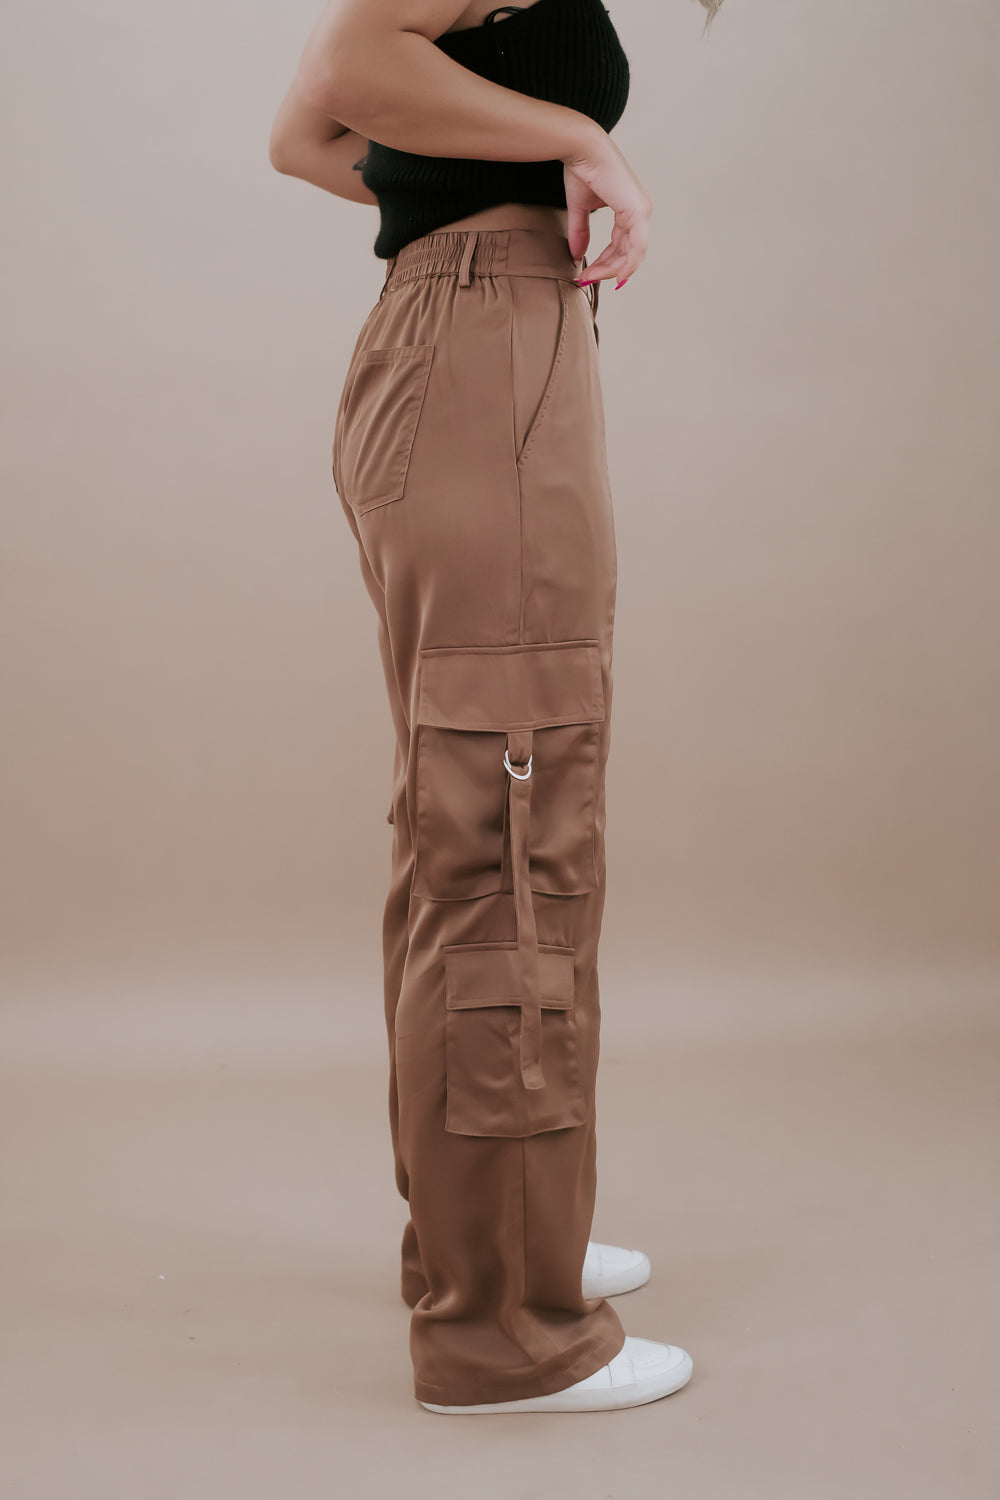 Baggy Pants are Spring's Hottest Trend—5 to Shop Now - Parade